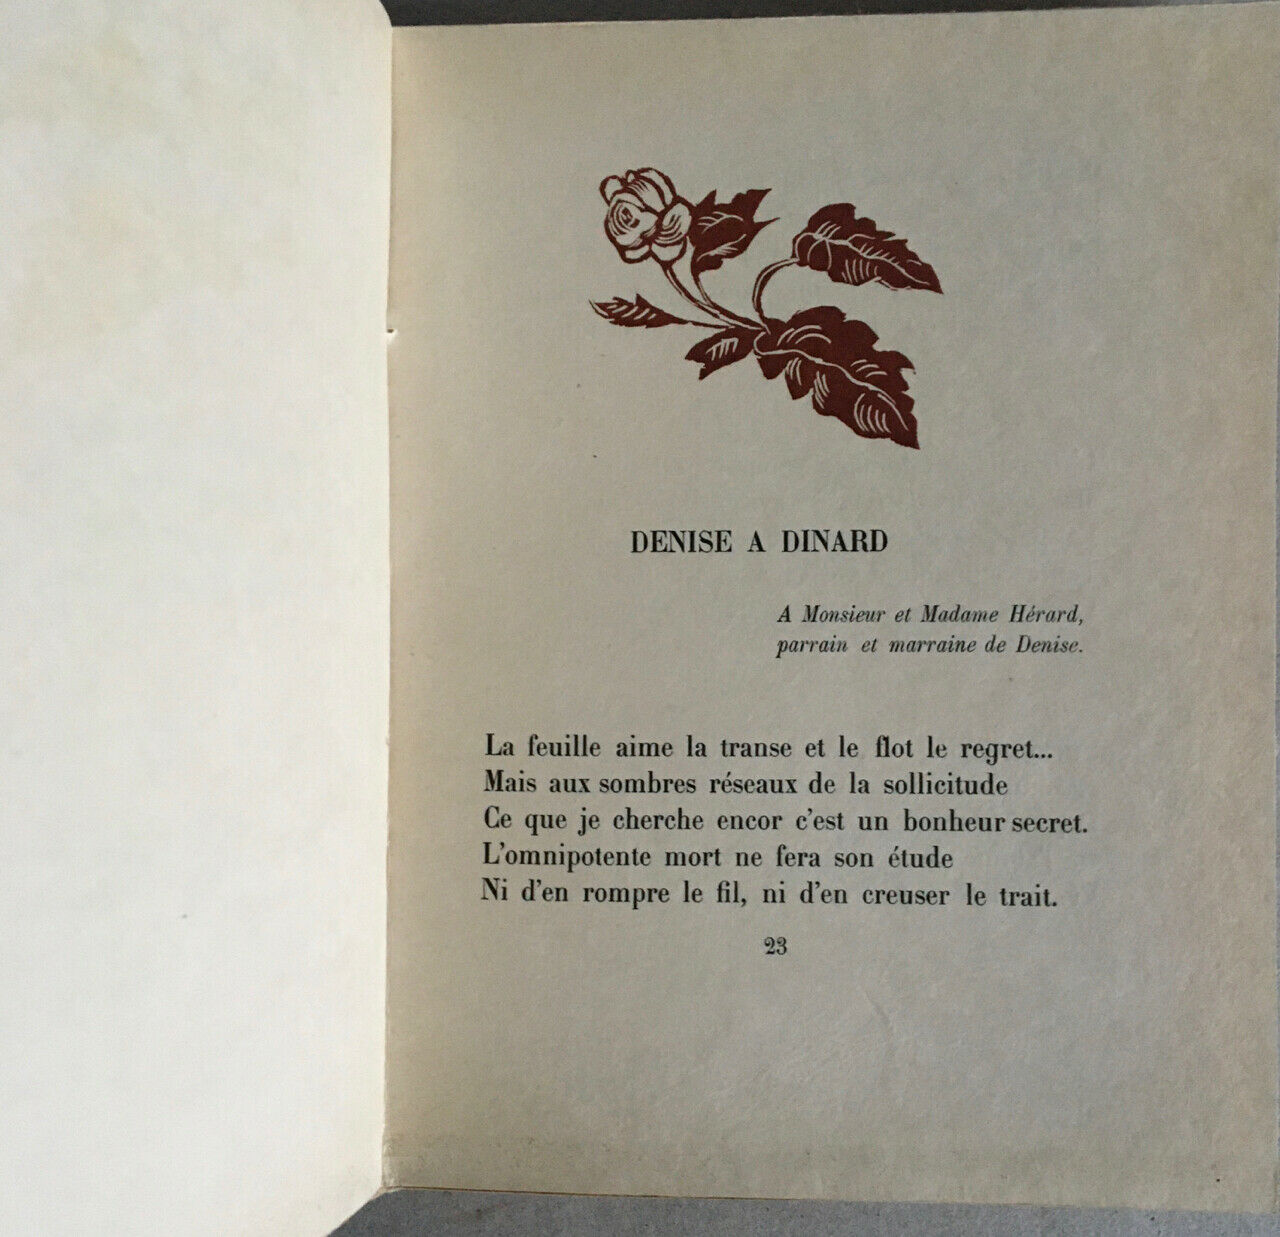 Jean Royère — Denise, poems — ill. Dubray — E.O. ex. n°/Japan — Seheur — 1931.